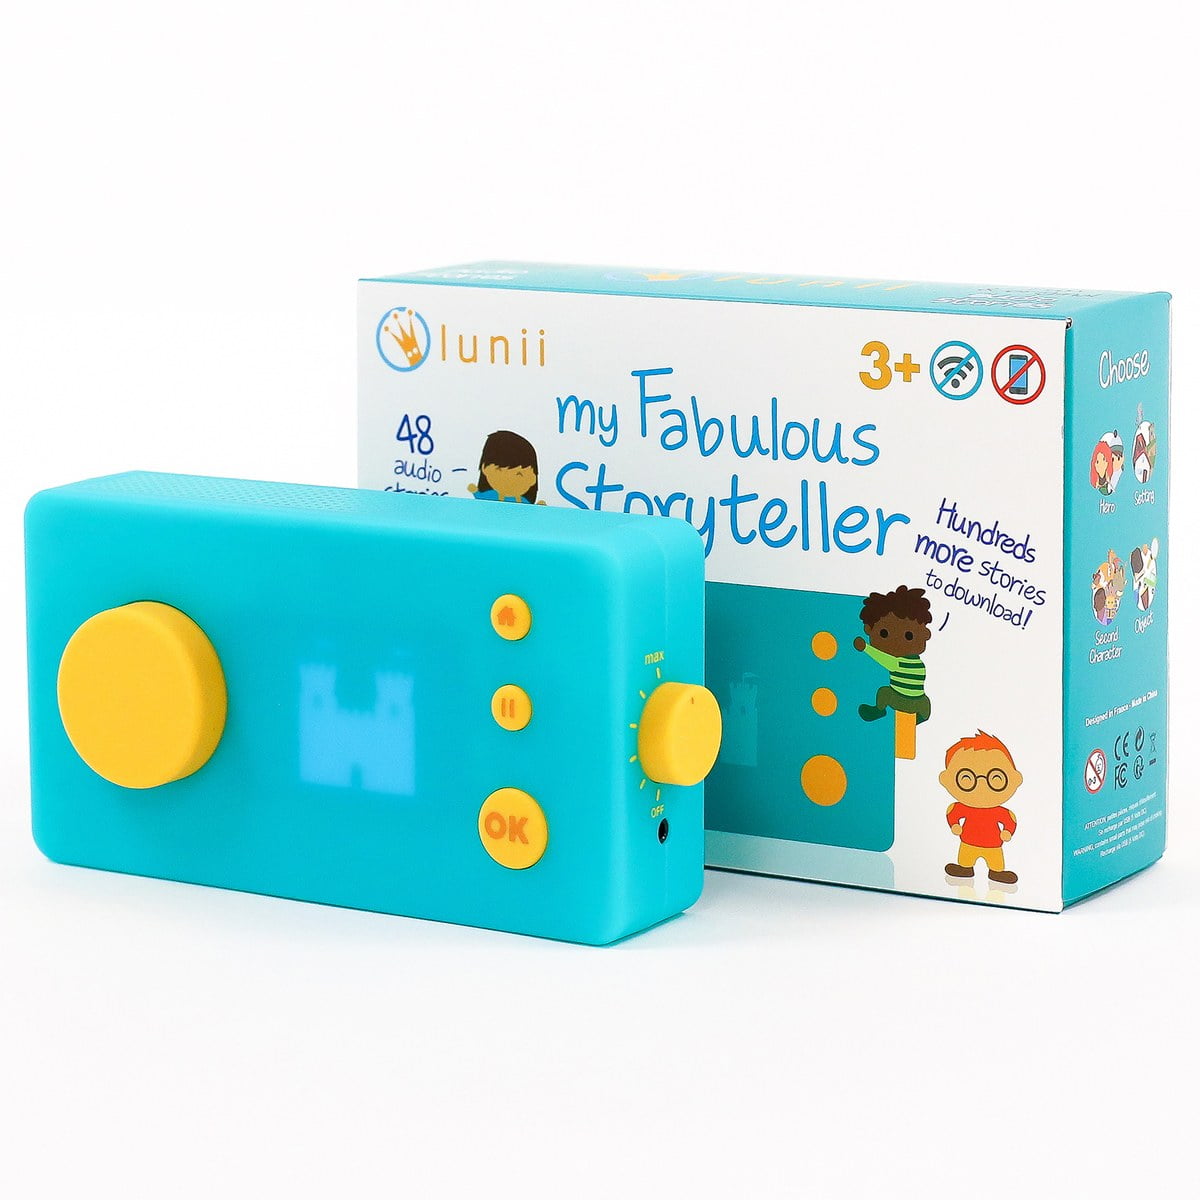 CES 2019: Lunii My Fabulous Storyteller is fuel for your kid's